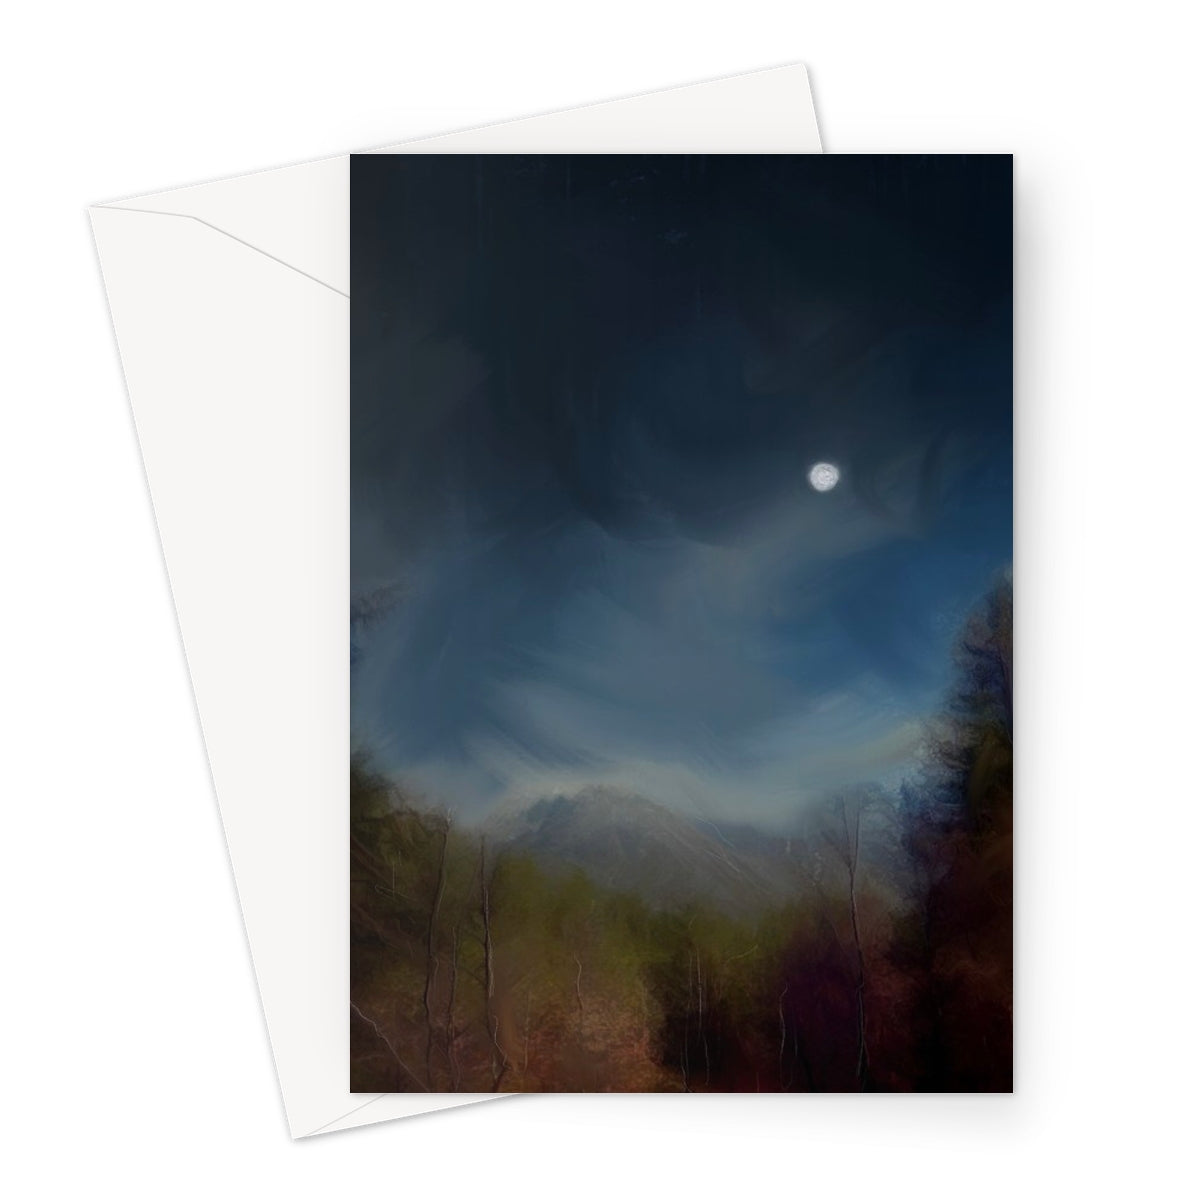 Glencoe Lochan Moonlight Art Gifts Greeting Card-Greetings Cards-Scottish Lochs & Mountains Art Gallery-A5 Portrait-1 Card-Paintings, Prints, Homeware, Art Gifts From Scotland By Scottish Artist Kevin Hunter